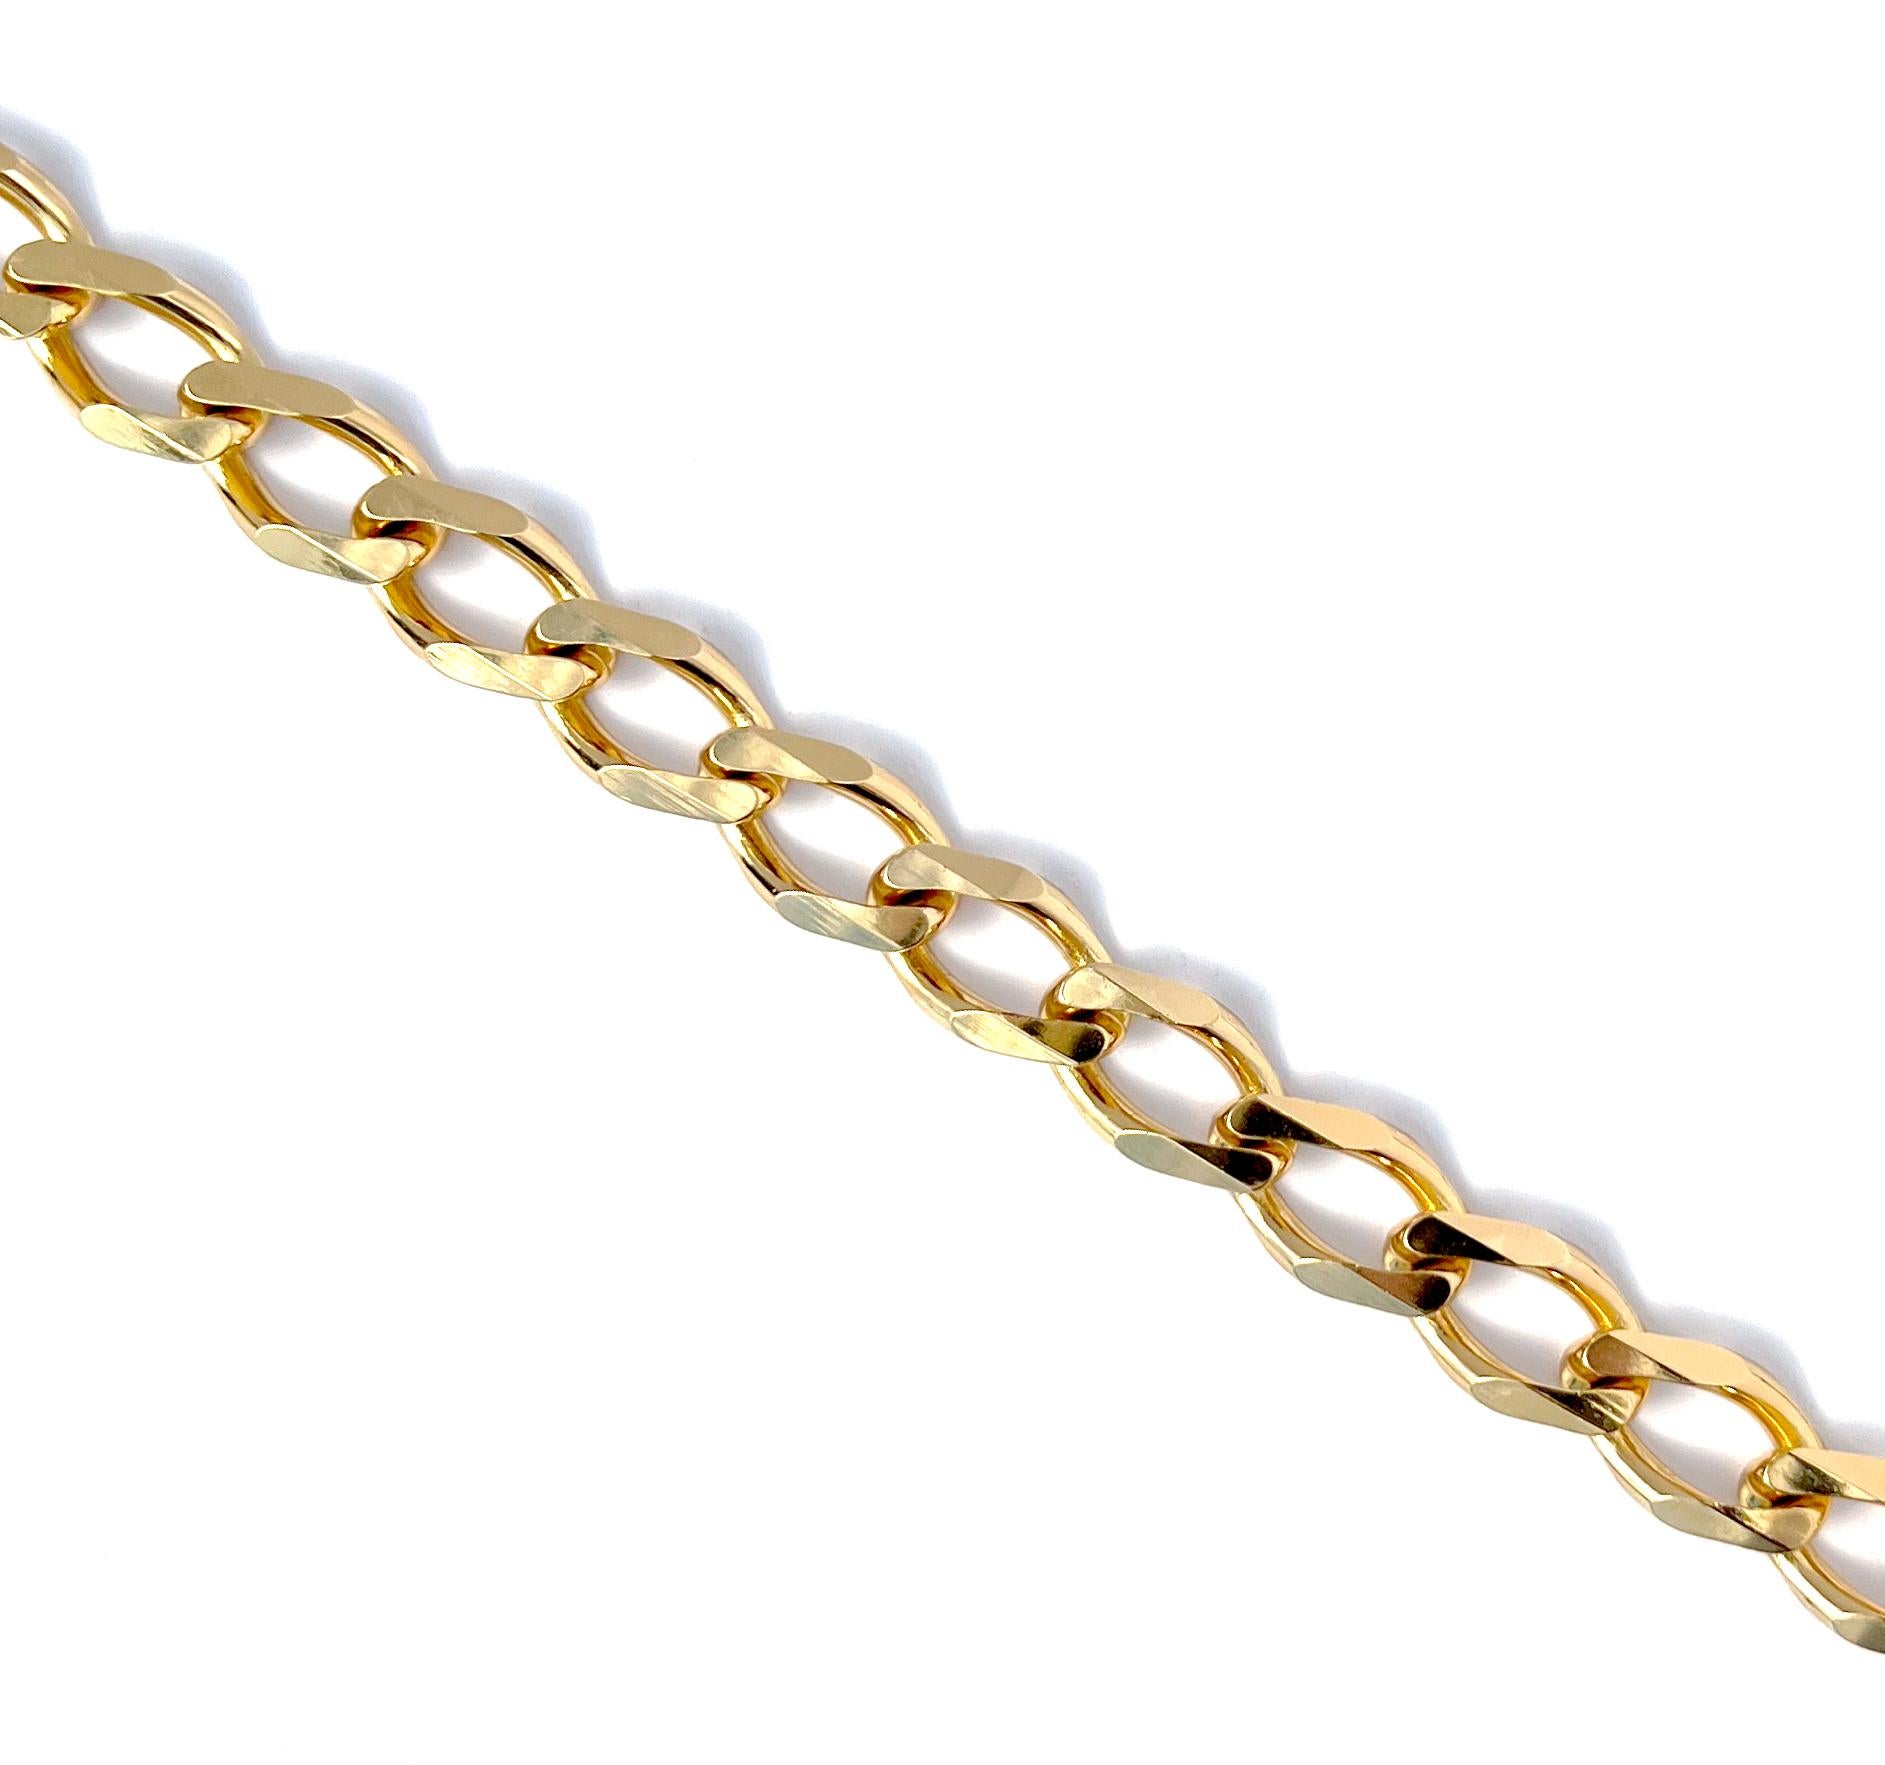 Vintage 1990s Christian Dior curb chain necklace in gold plate.  This choker length heritage necklace features chunky flat curb chain links in a high-polish finish.  The necklace fastens with a foldover clasp and measures 16 inches in length.  Very